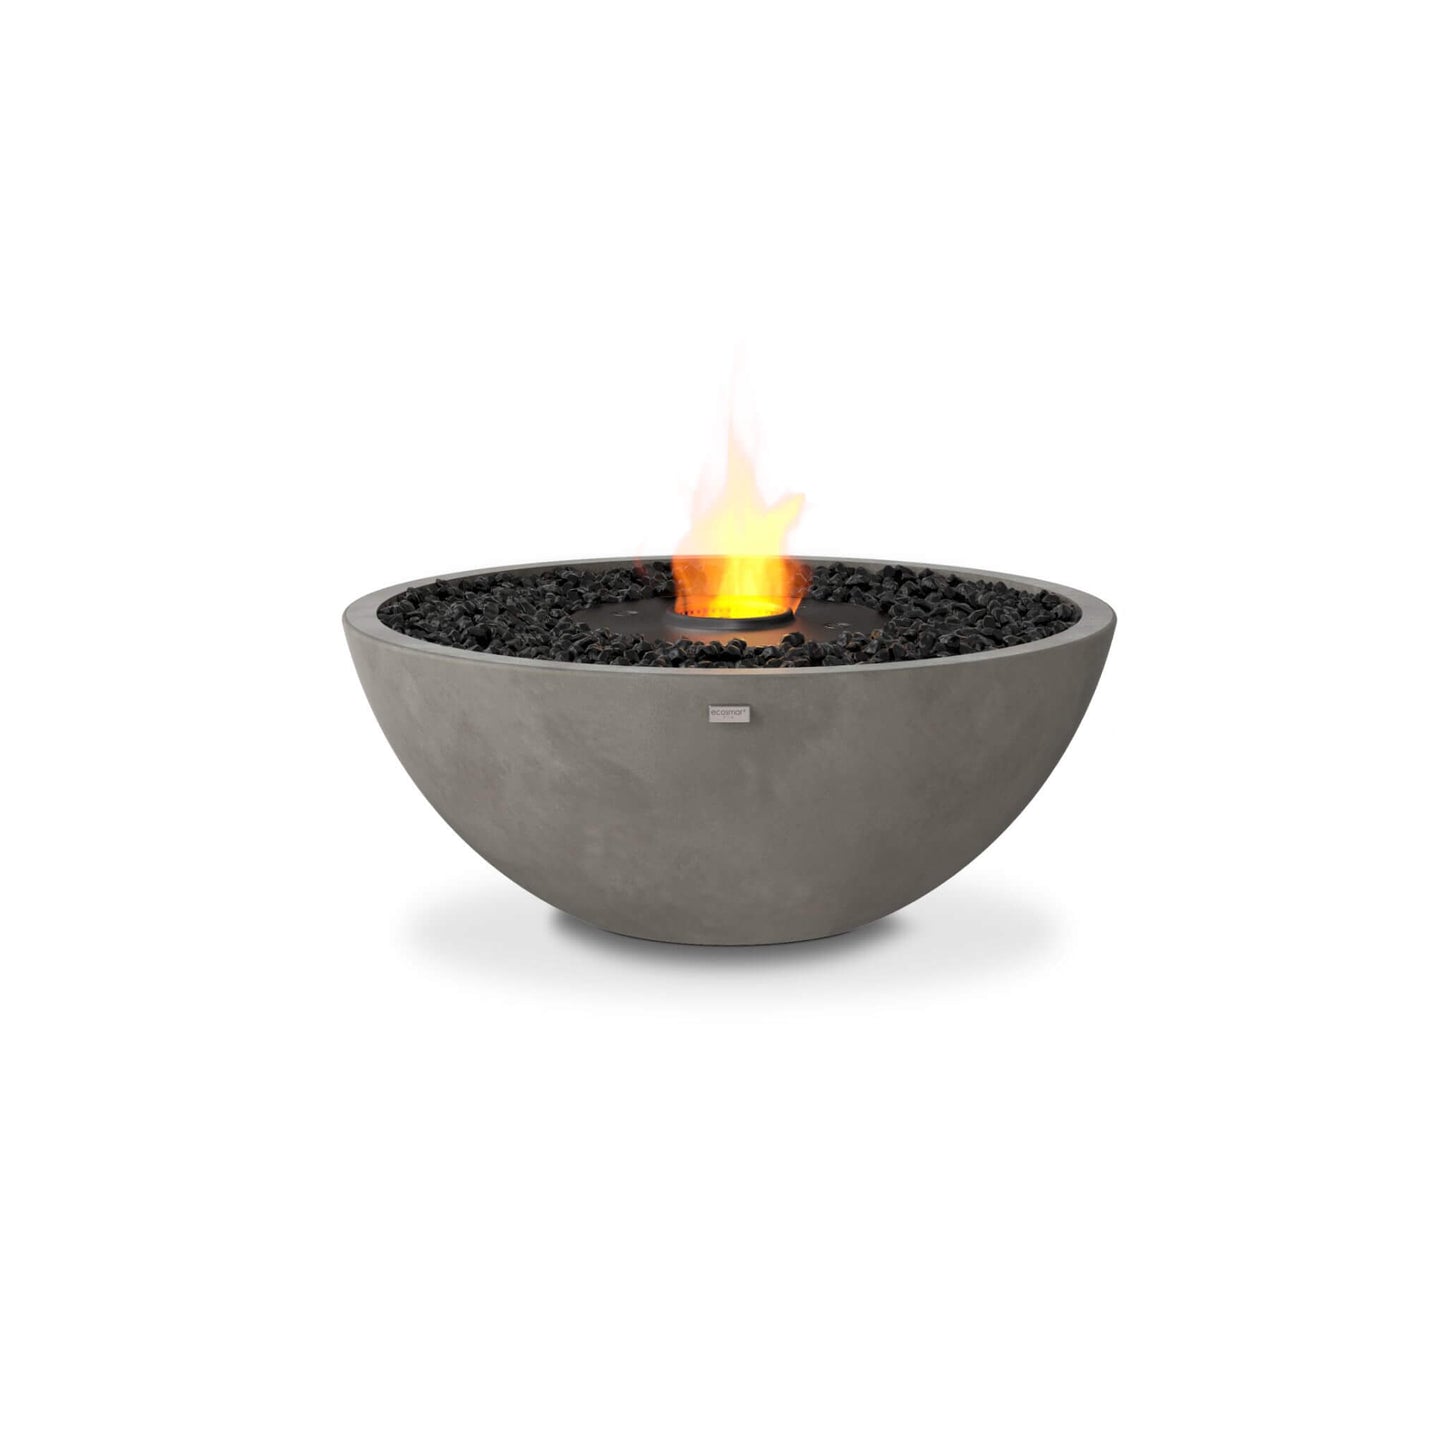 Ecosmart Fire Mix 850 bioethanol fire pit bowl in grey concrete with a black steel burner and decorative black charcoal